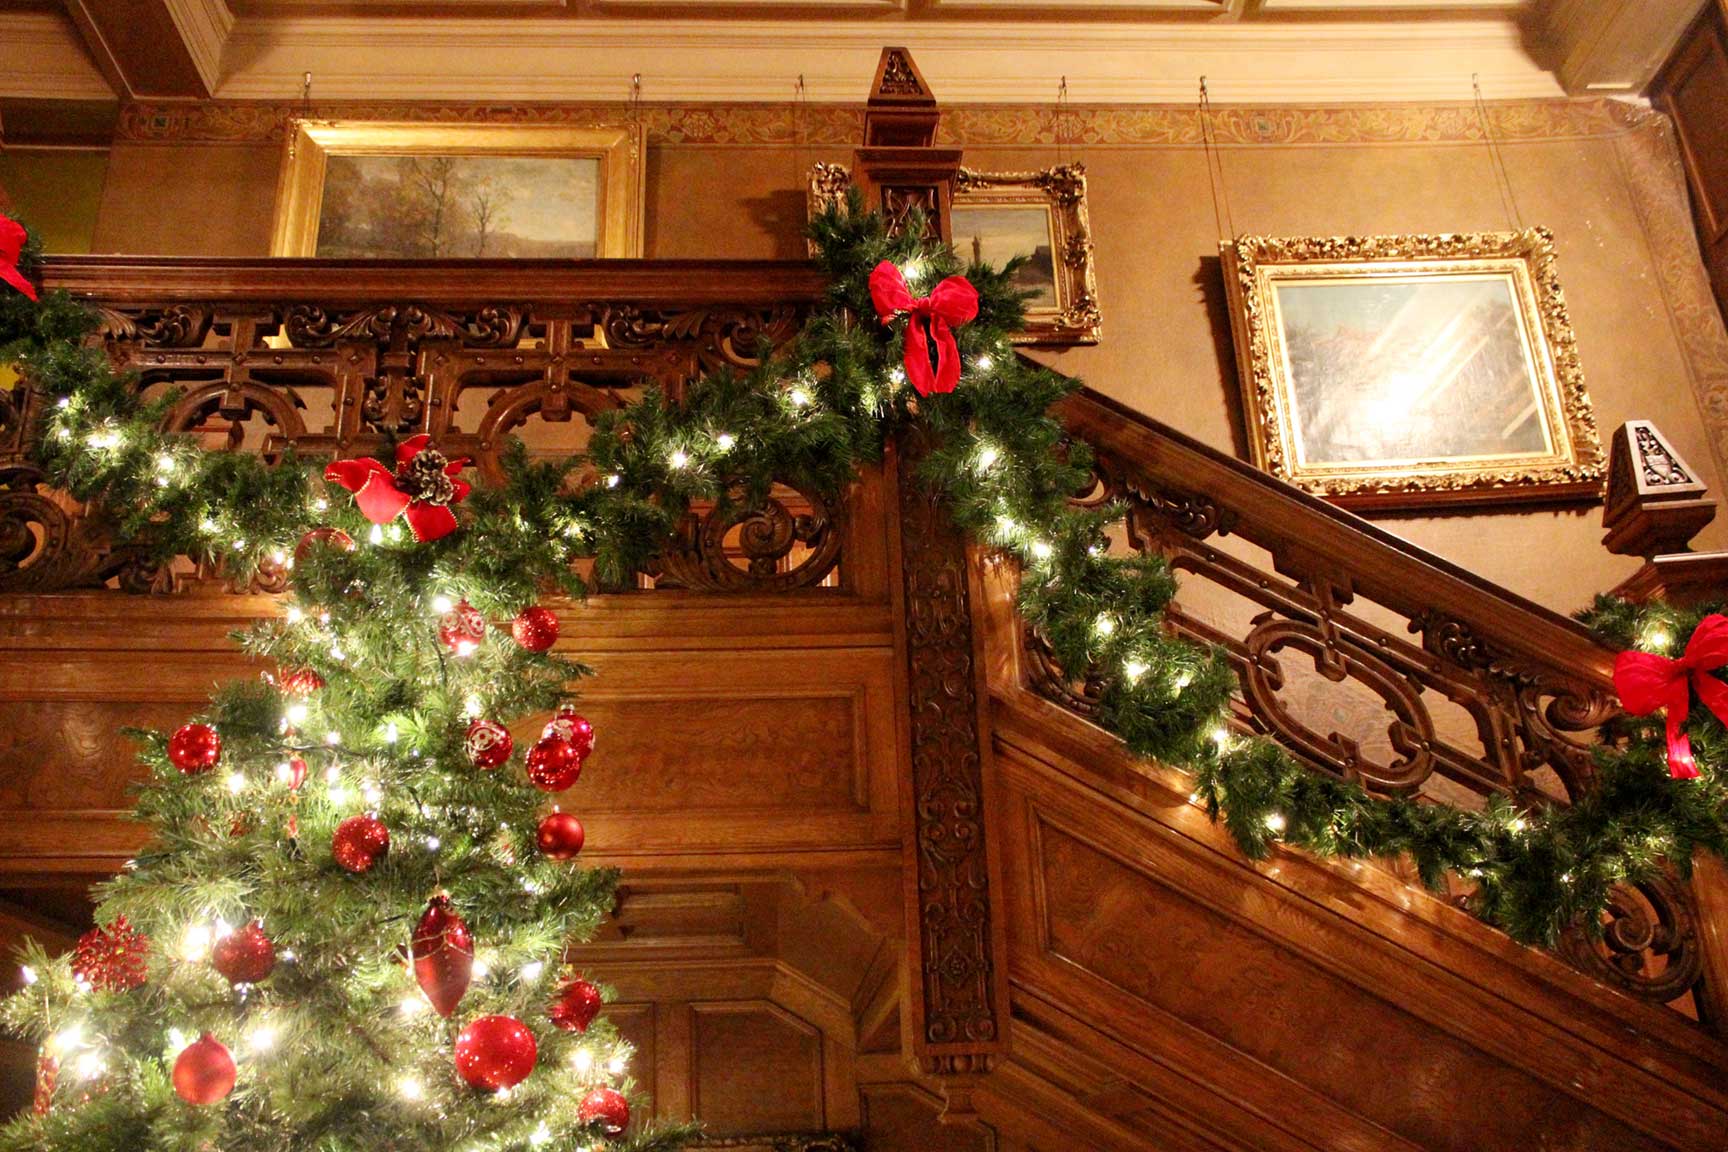 Green garland with white lights and red bowties lines wooden railings of a staircase with a large green tree in the foreground lit with white lights and red ornaments.